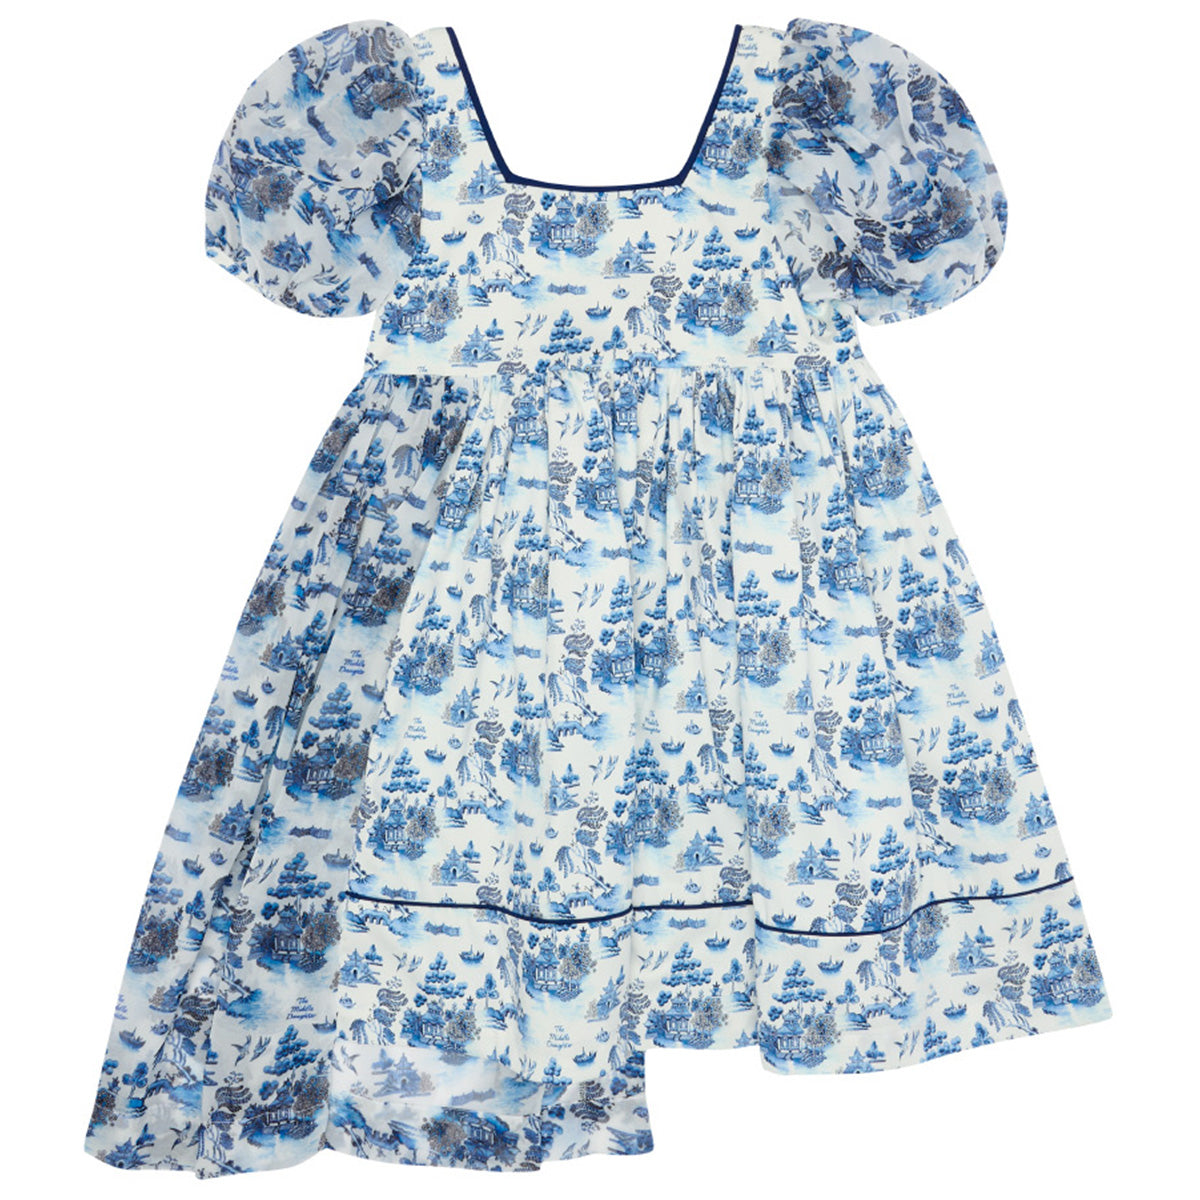 The Appetite For Change Dress from The Middle Daughter. Cotton poplin & chiffon mix dress in our own developed print.